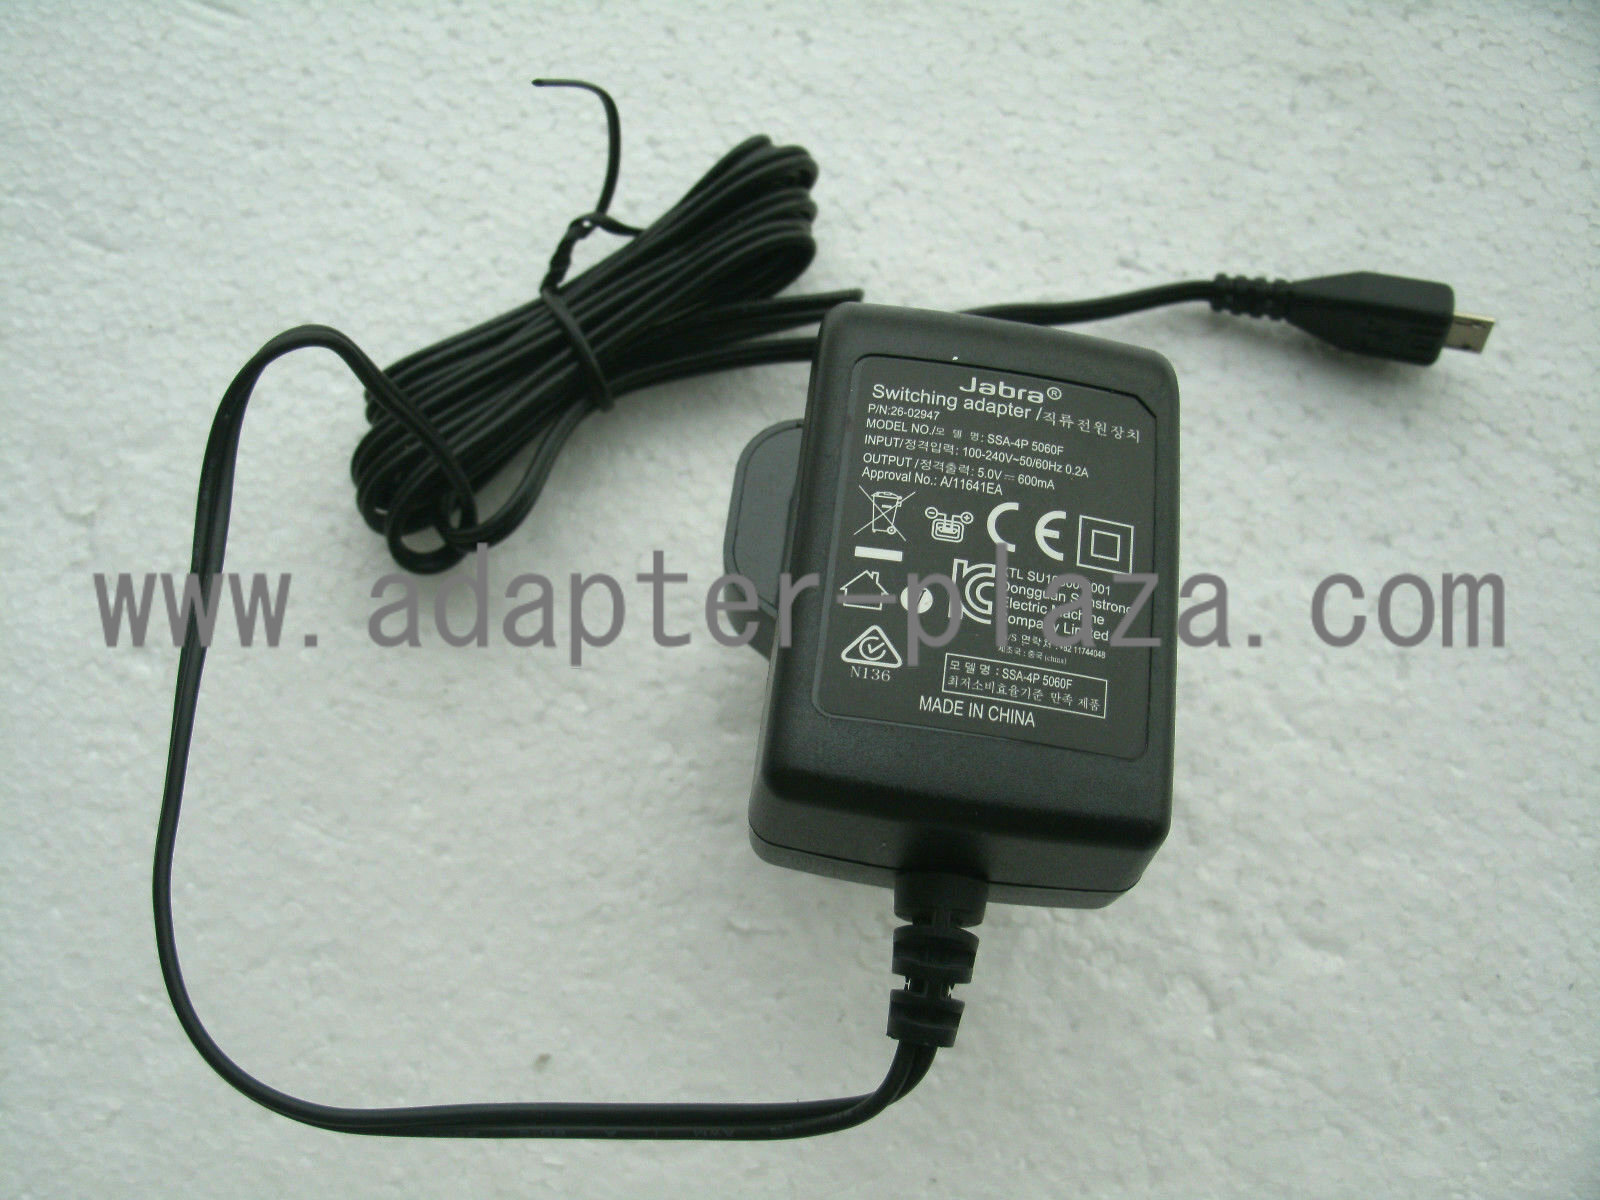 New JABRA SSA-4P 5060F SWITCHING ADAPTER 5V 0.6A 26-02947 power supply charger - Click Image to Close